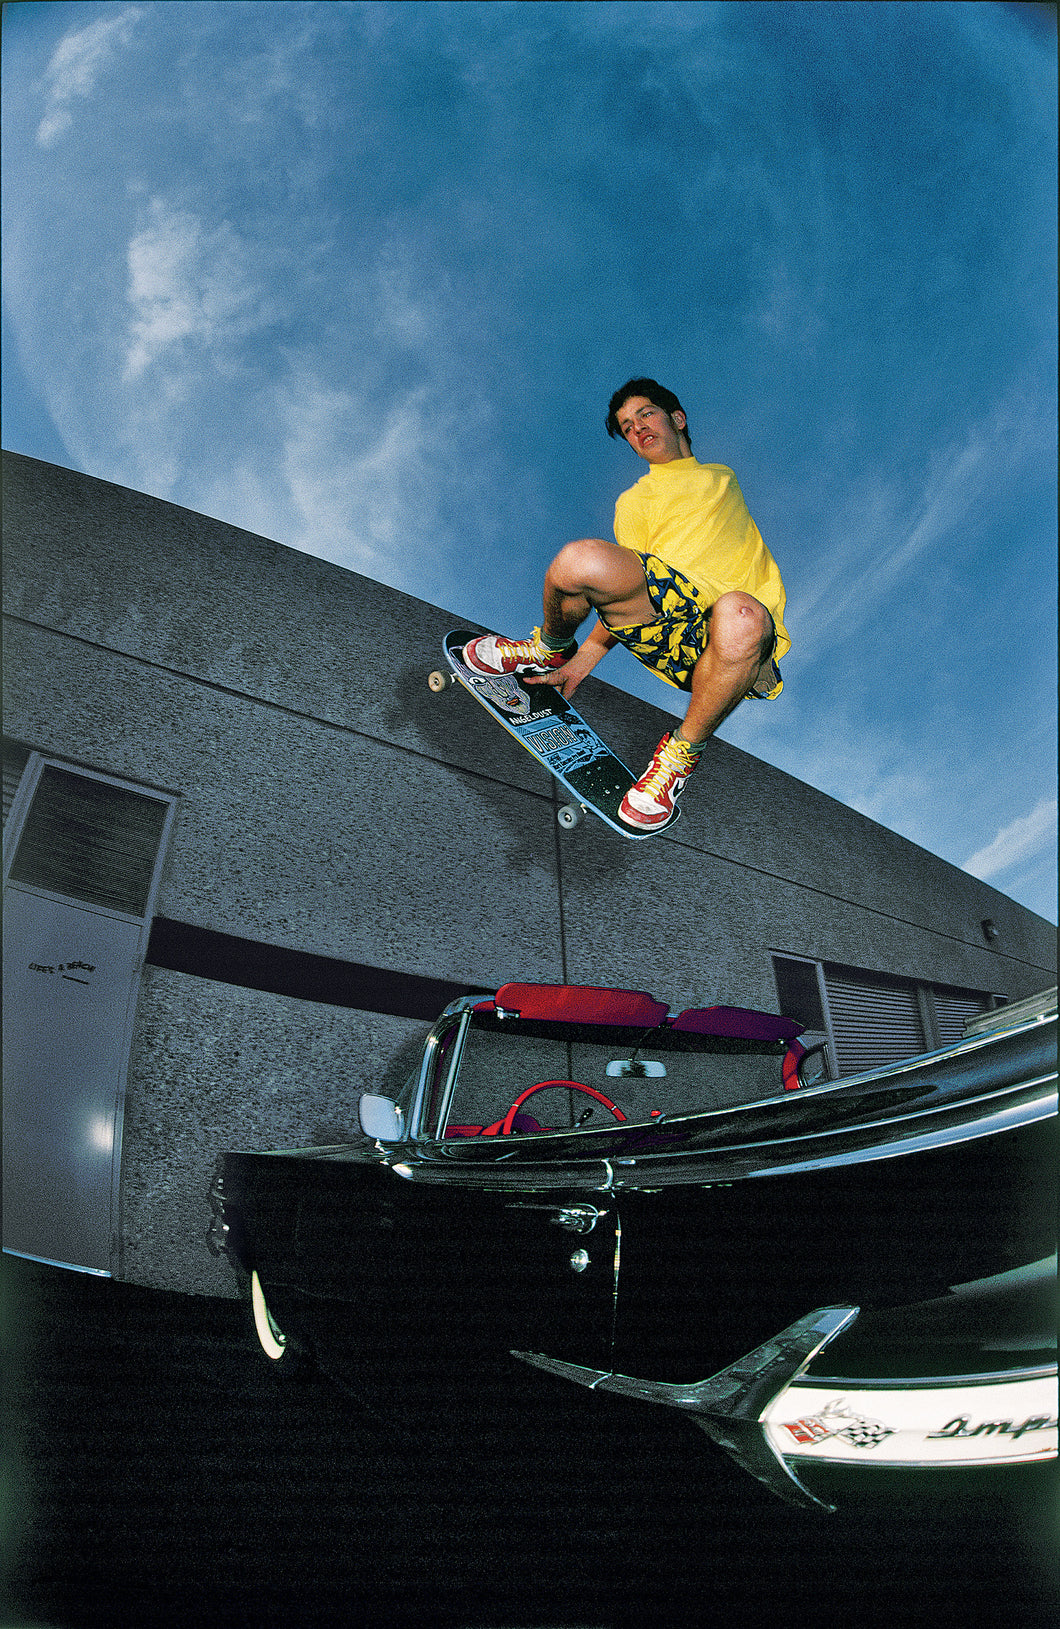 Mark Gonzales Jumps a Chevy Impala in 1986 J Grant Brittain